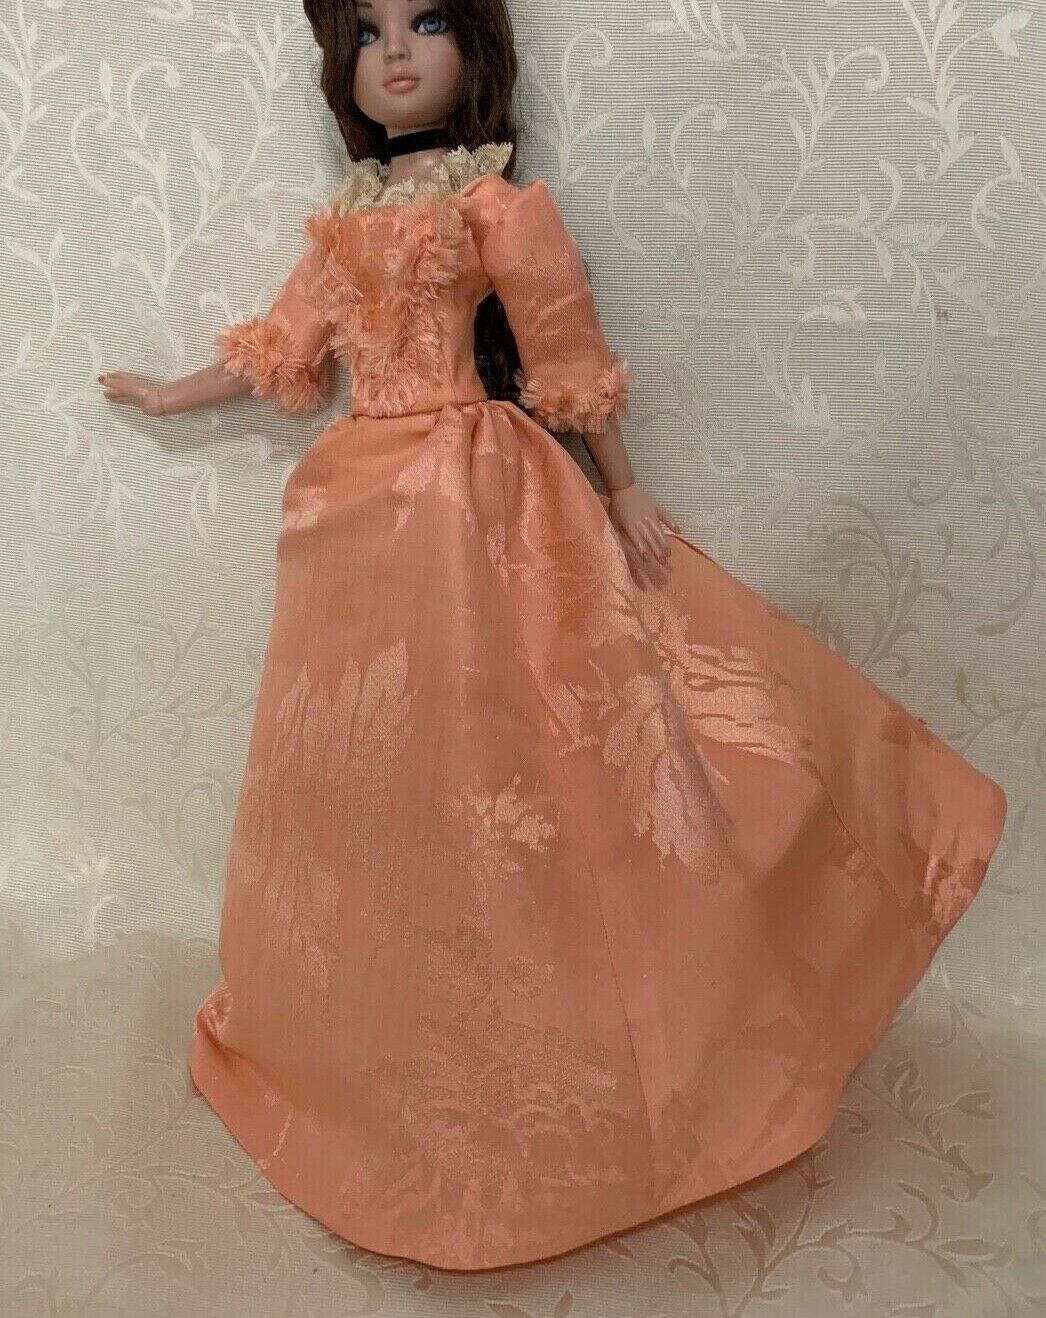 Two Piece Brocade Gown Of Vintage Materials For Tonner Ellowyne Wilde Doll